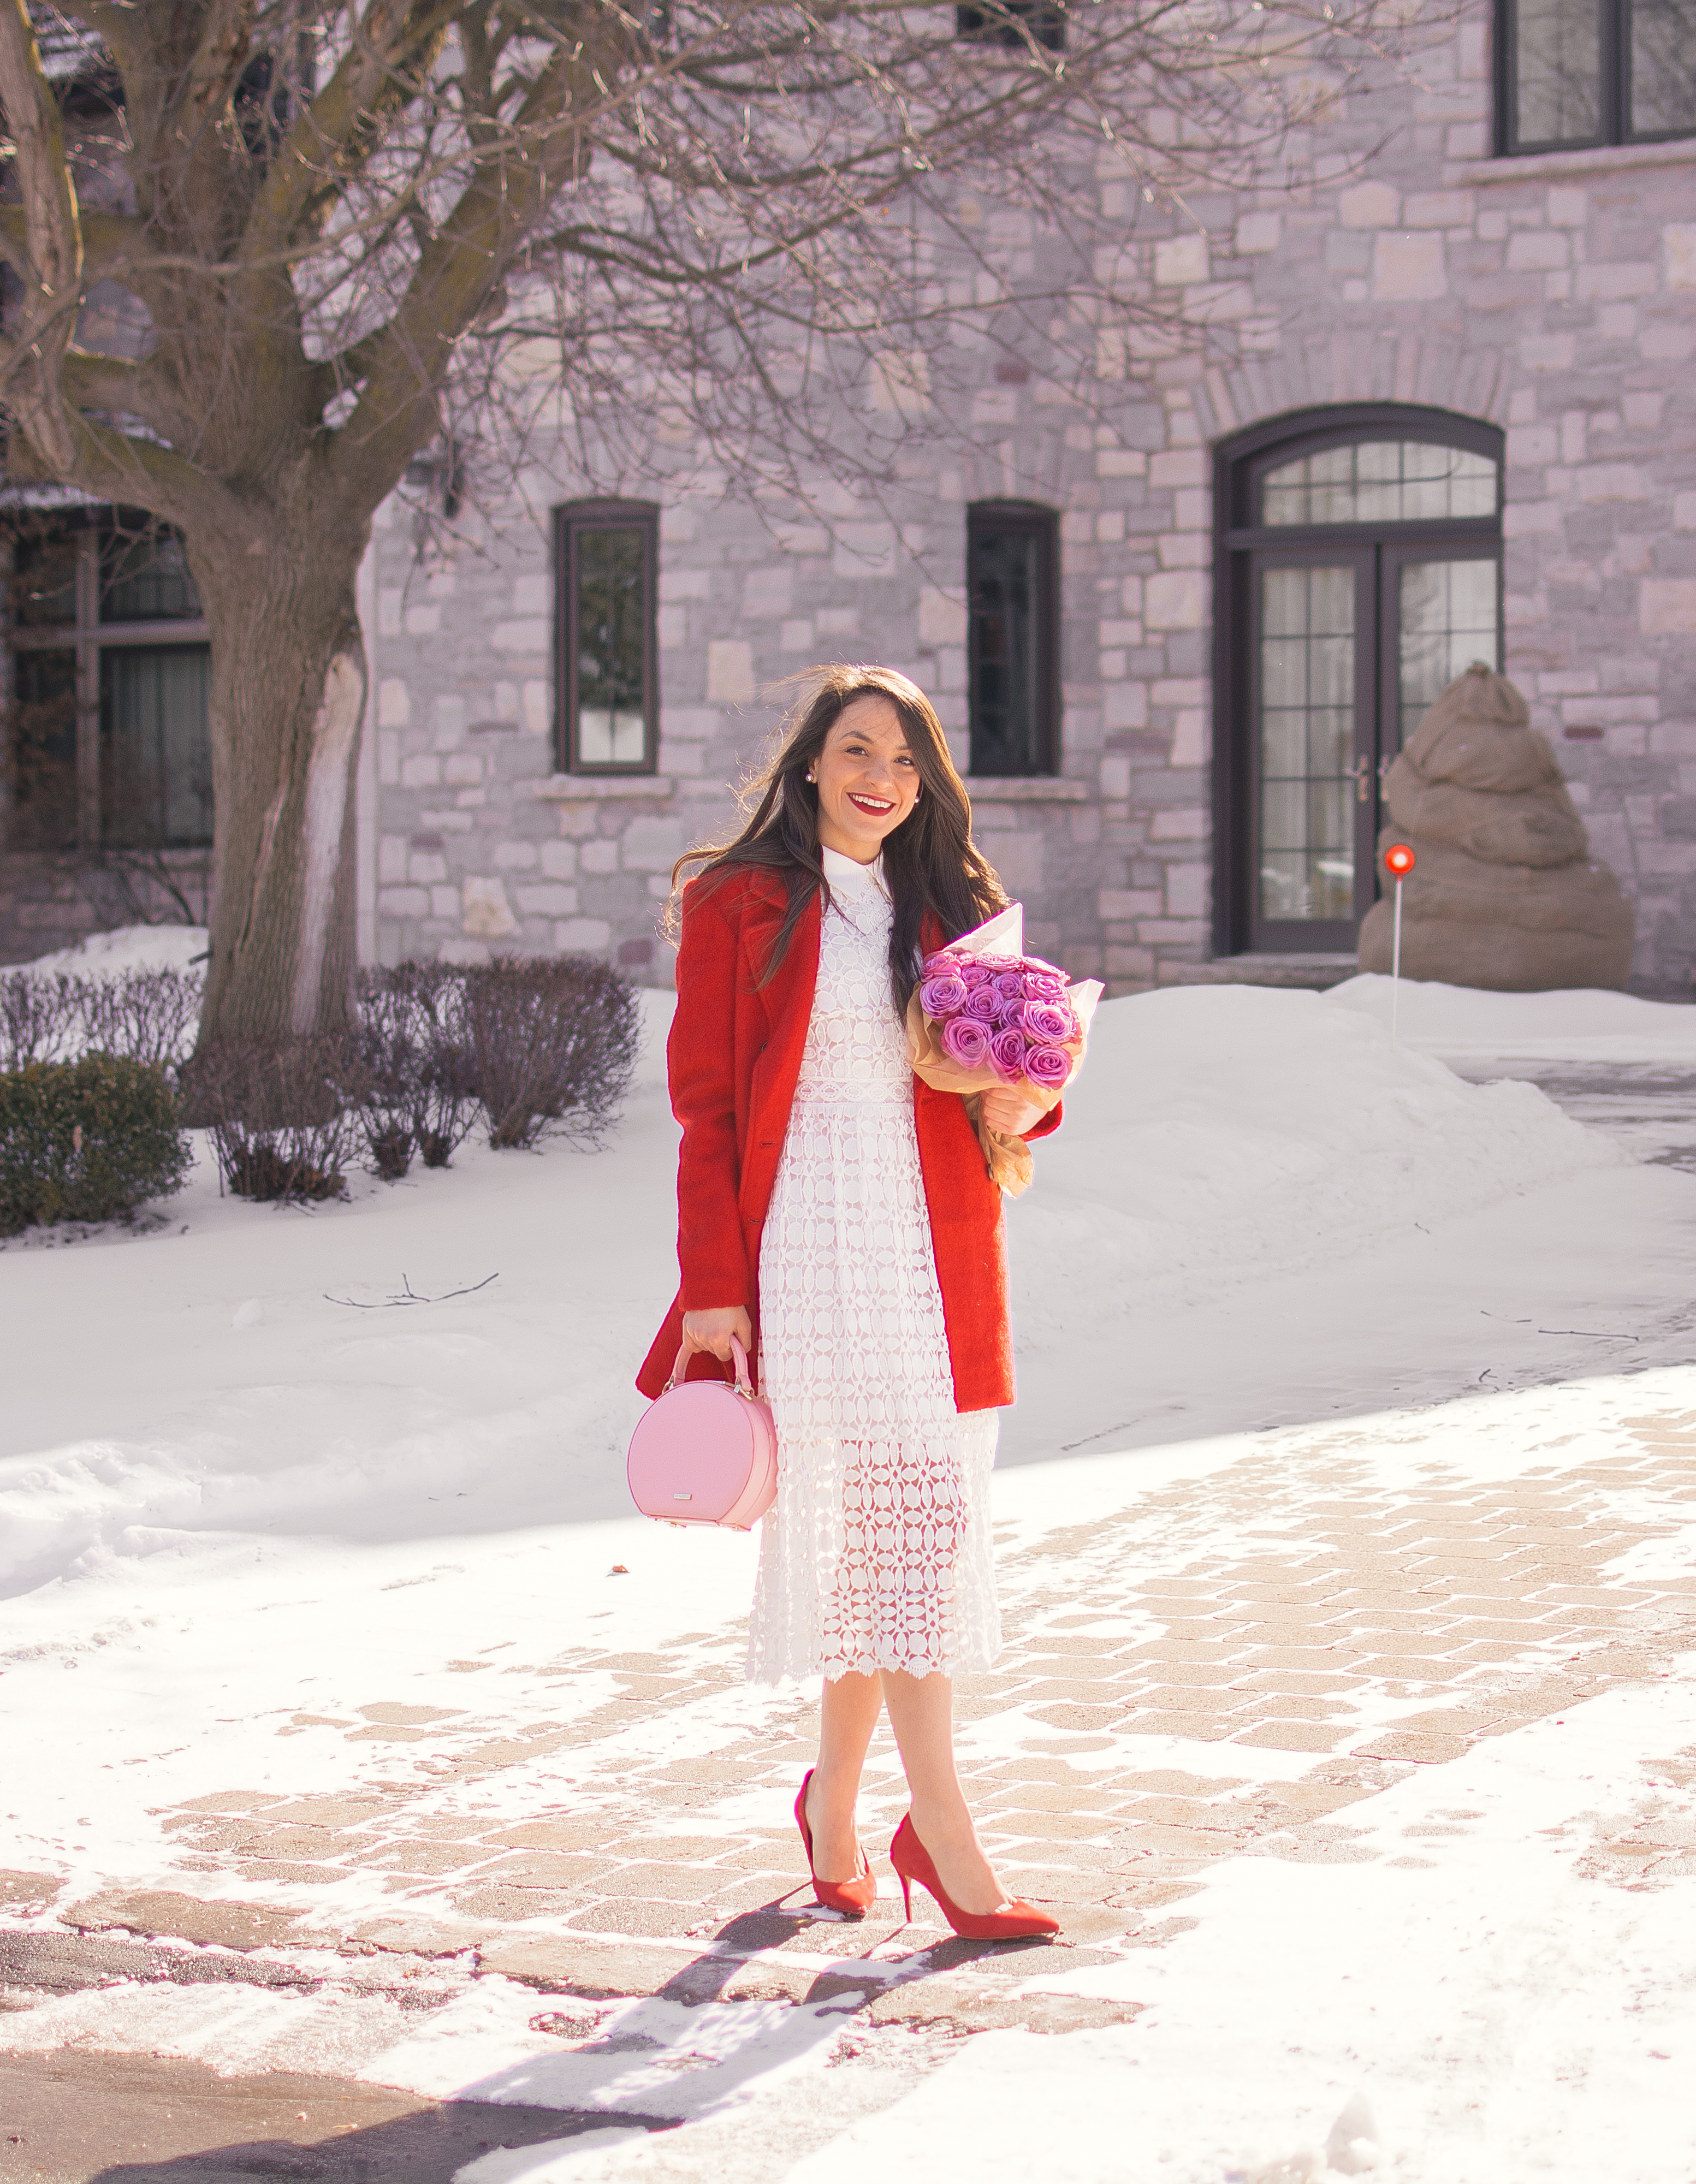 My Favourite Red Pieces for Valentine's Day | Red Coat| |White Lace Dress| Pink Flowers | Winter Looks | The Pink Brunette 